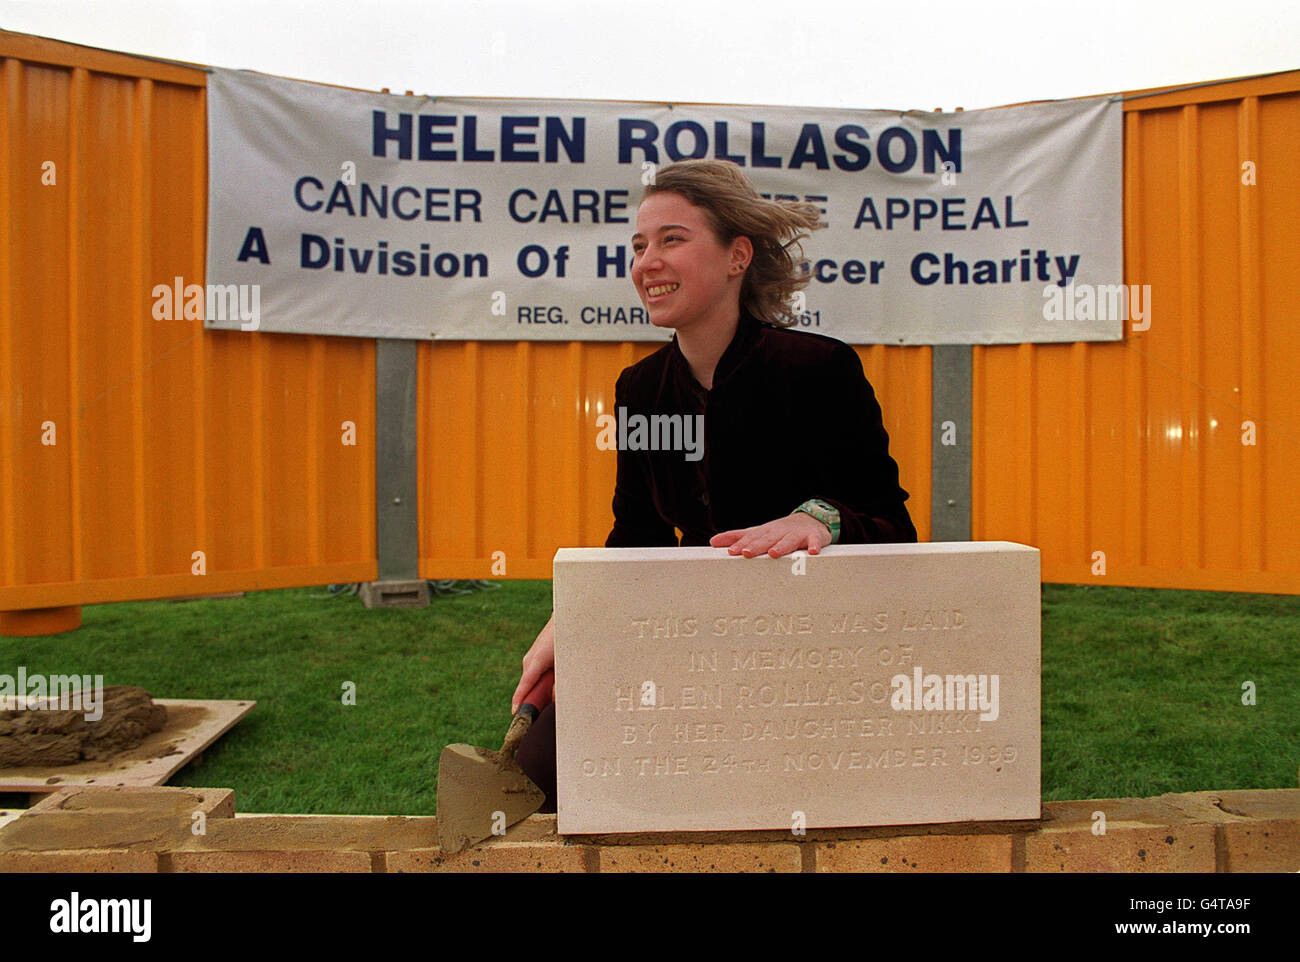 Nikki Rollason,16, lays a foundation stone for a cancer centre, at the North Middlesex Hospital in north London, to be named after her mother, BBC presenter Helen Rollason. * Helen, 43, of Shenfield, near Brentwood, Essex, died of cancer in August, two years after being given just three months to live. She set up the appeal for the cancer centre at the North Middlesex Hospital, but did not live to see the start of building work. Stock Photo